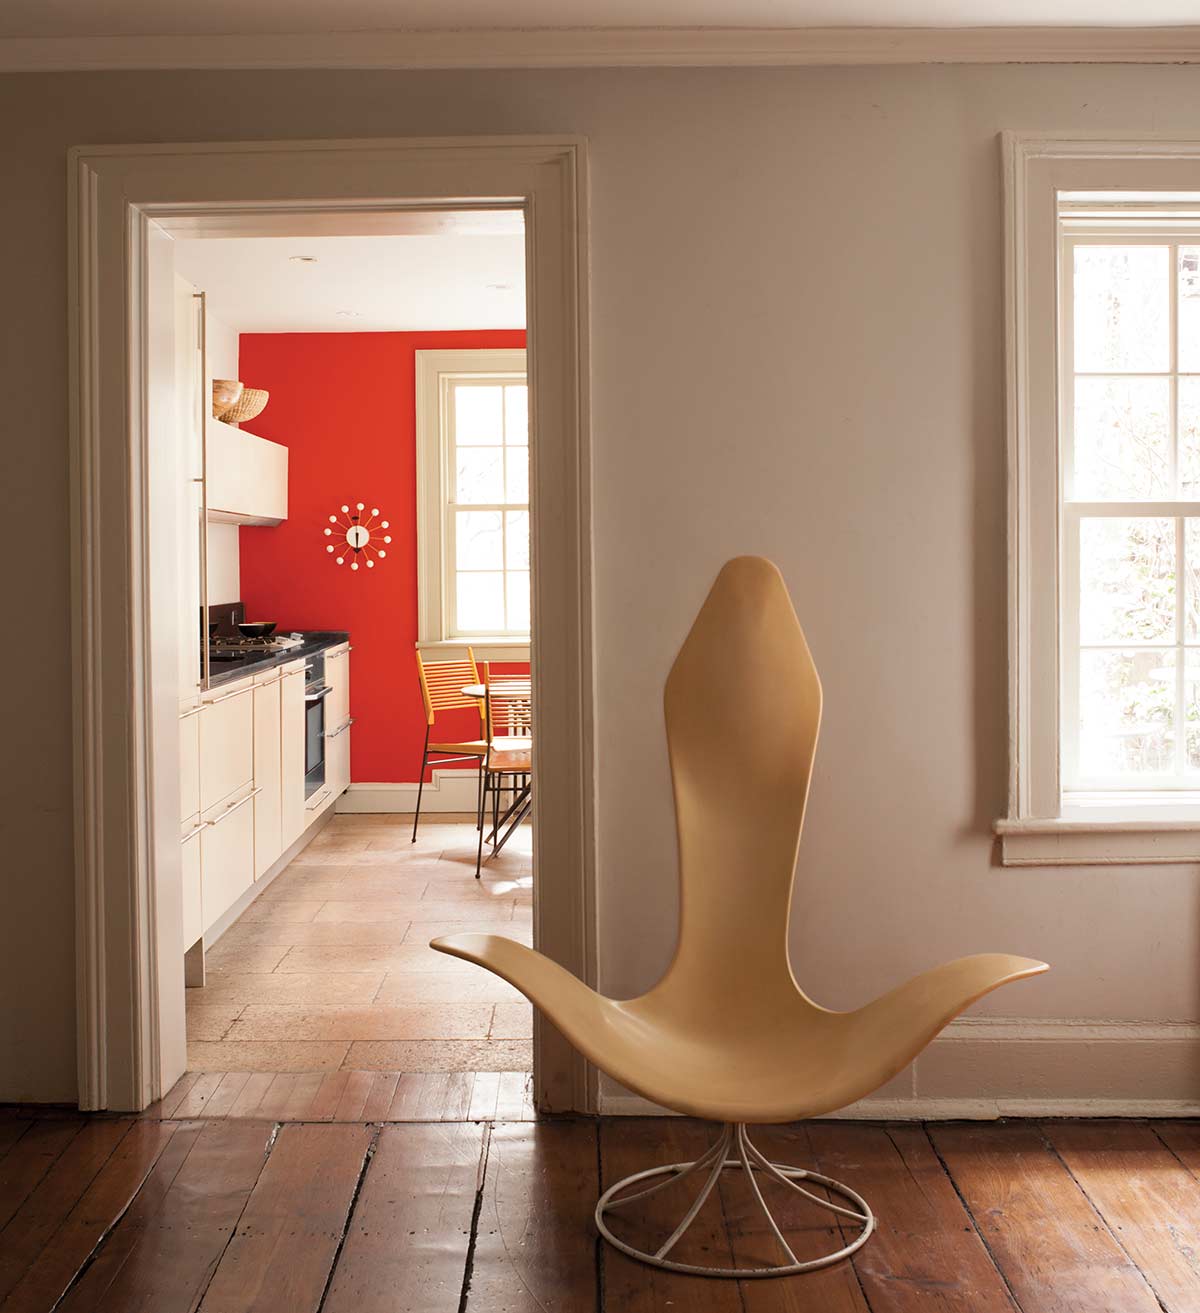 partial view of kitchen through doorway with vibrant orange/red wall